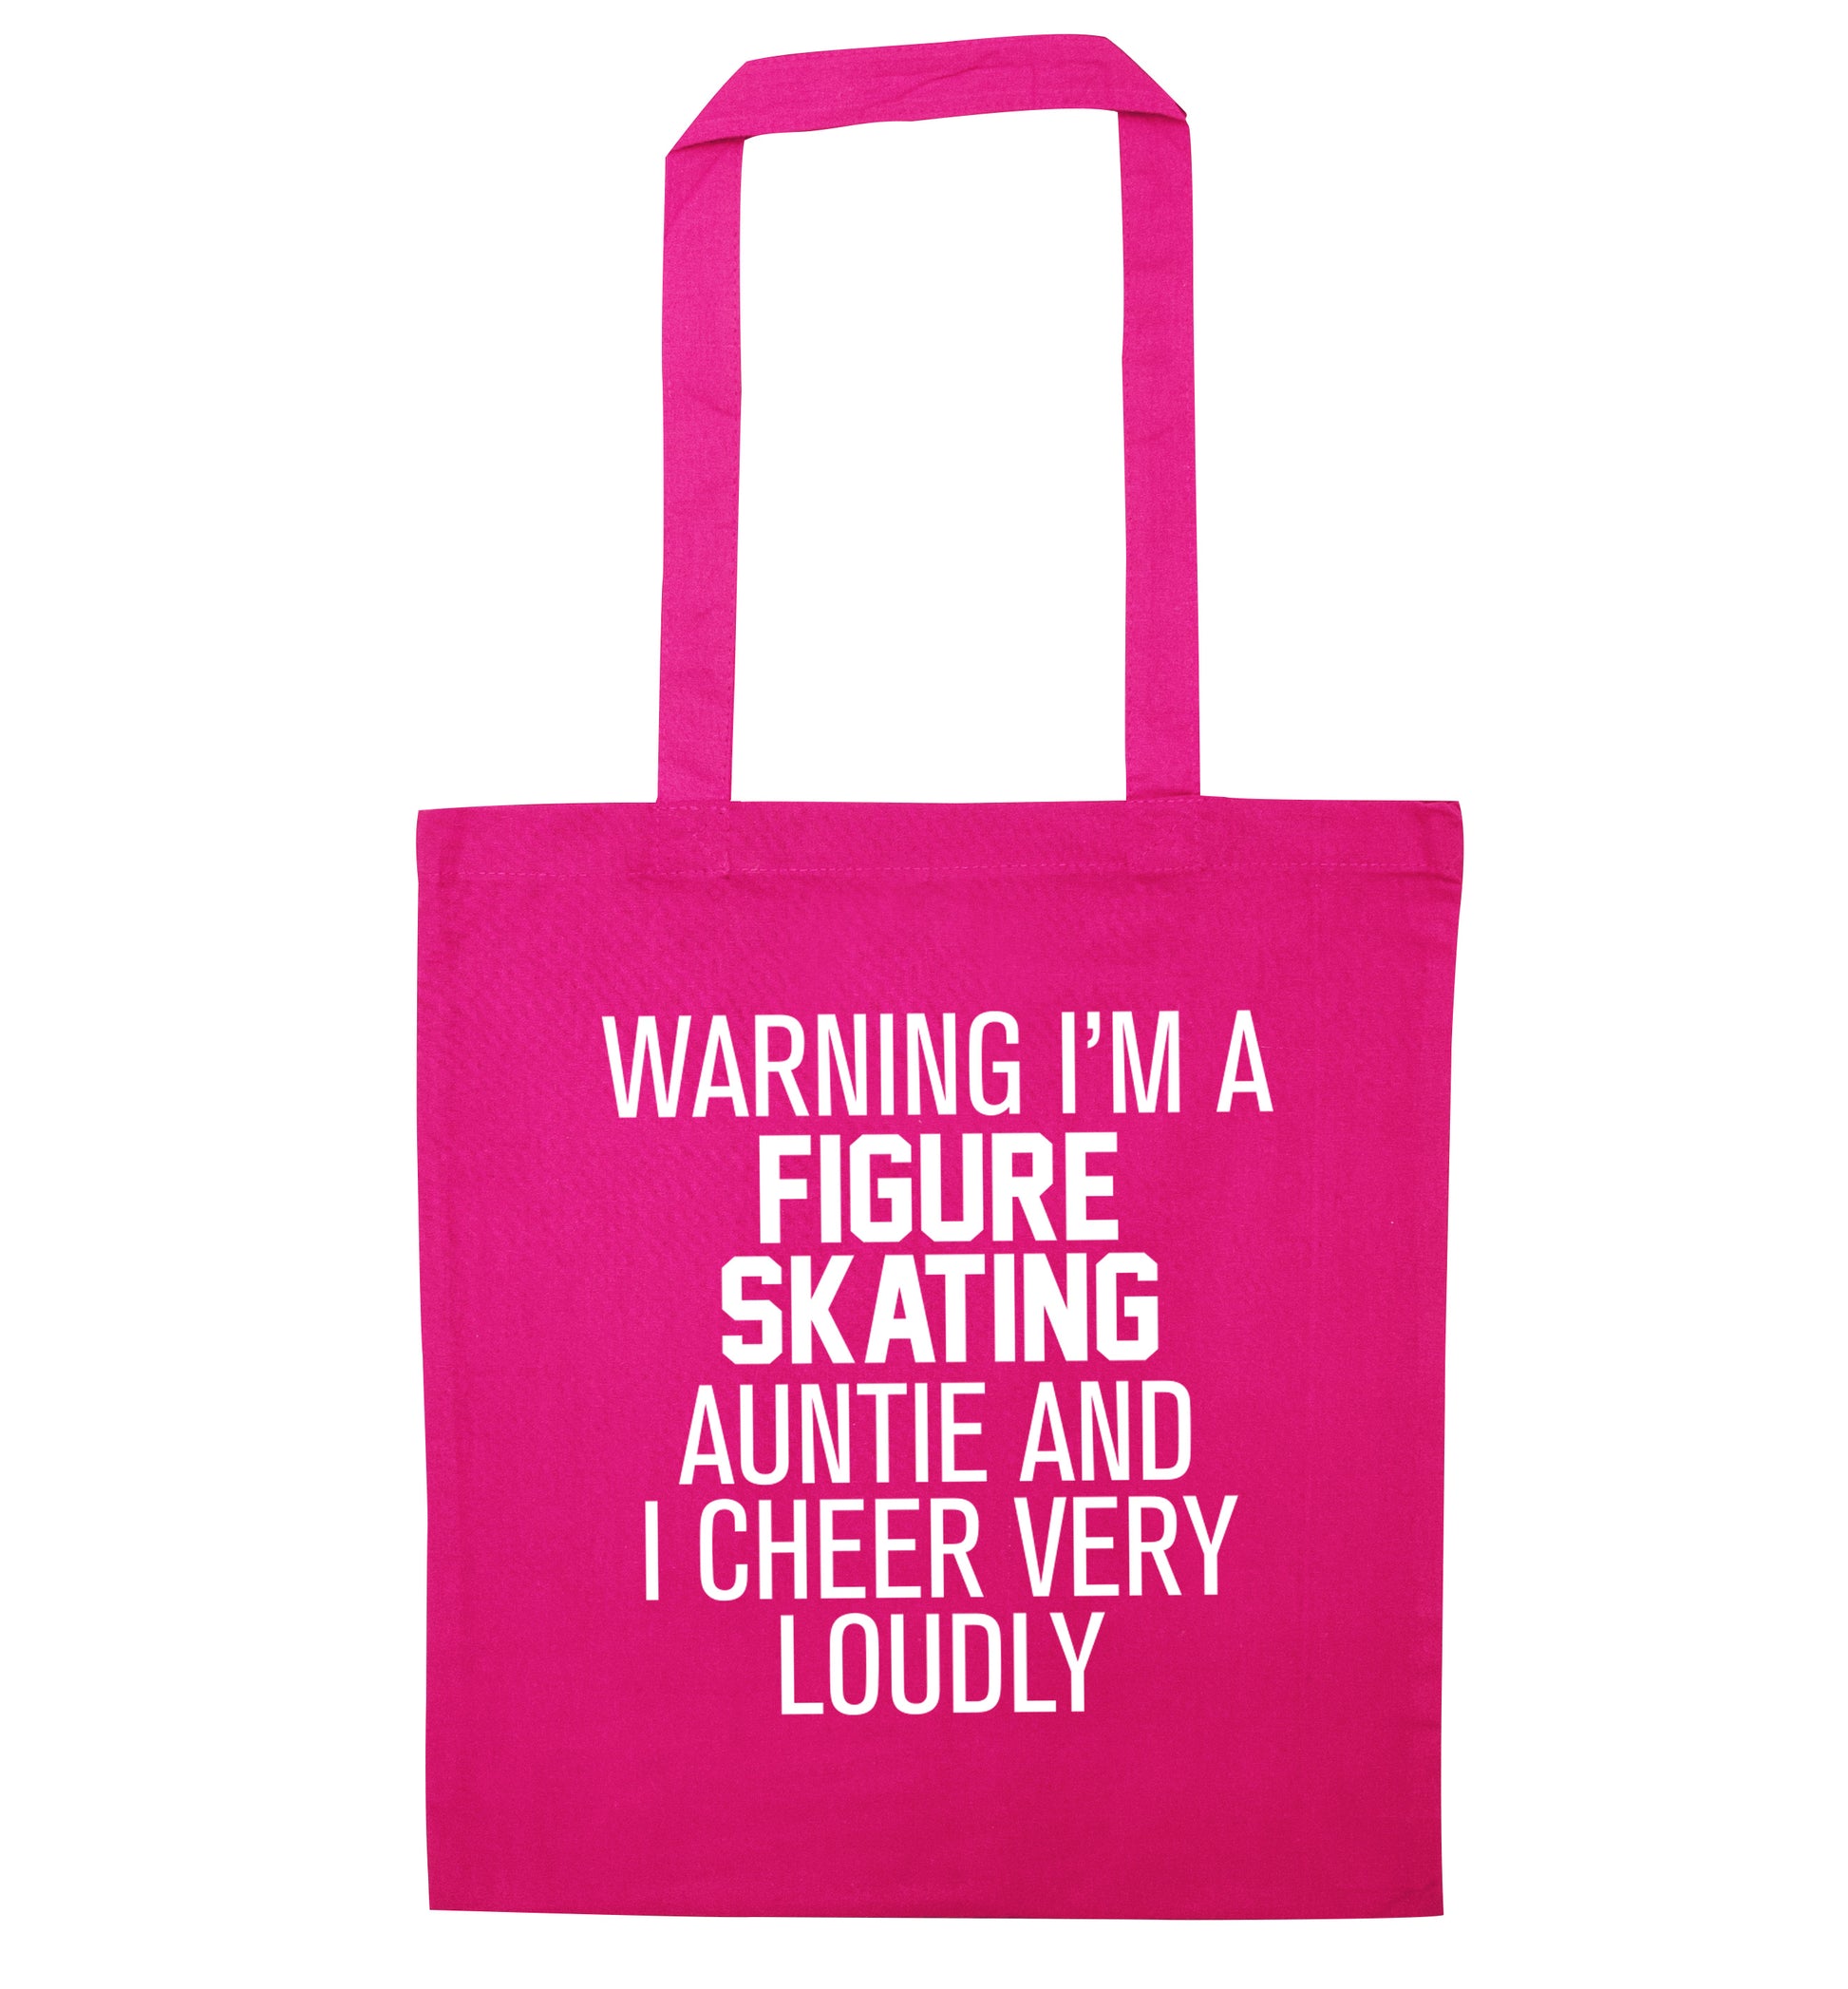 Warning I'm a figure skating auntie and I cheer very loudly pink tote bag